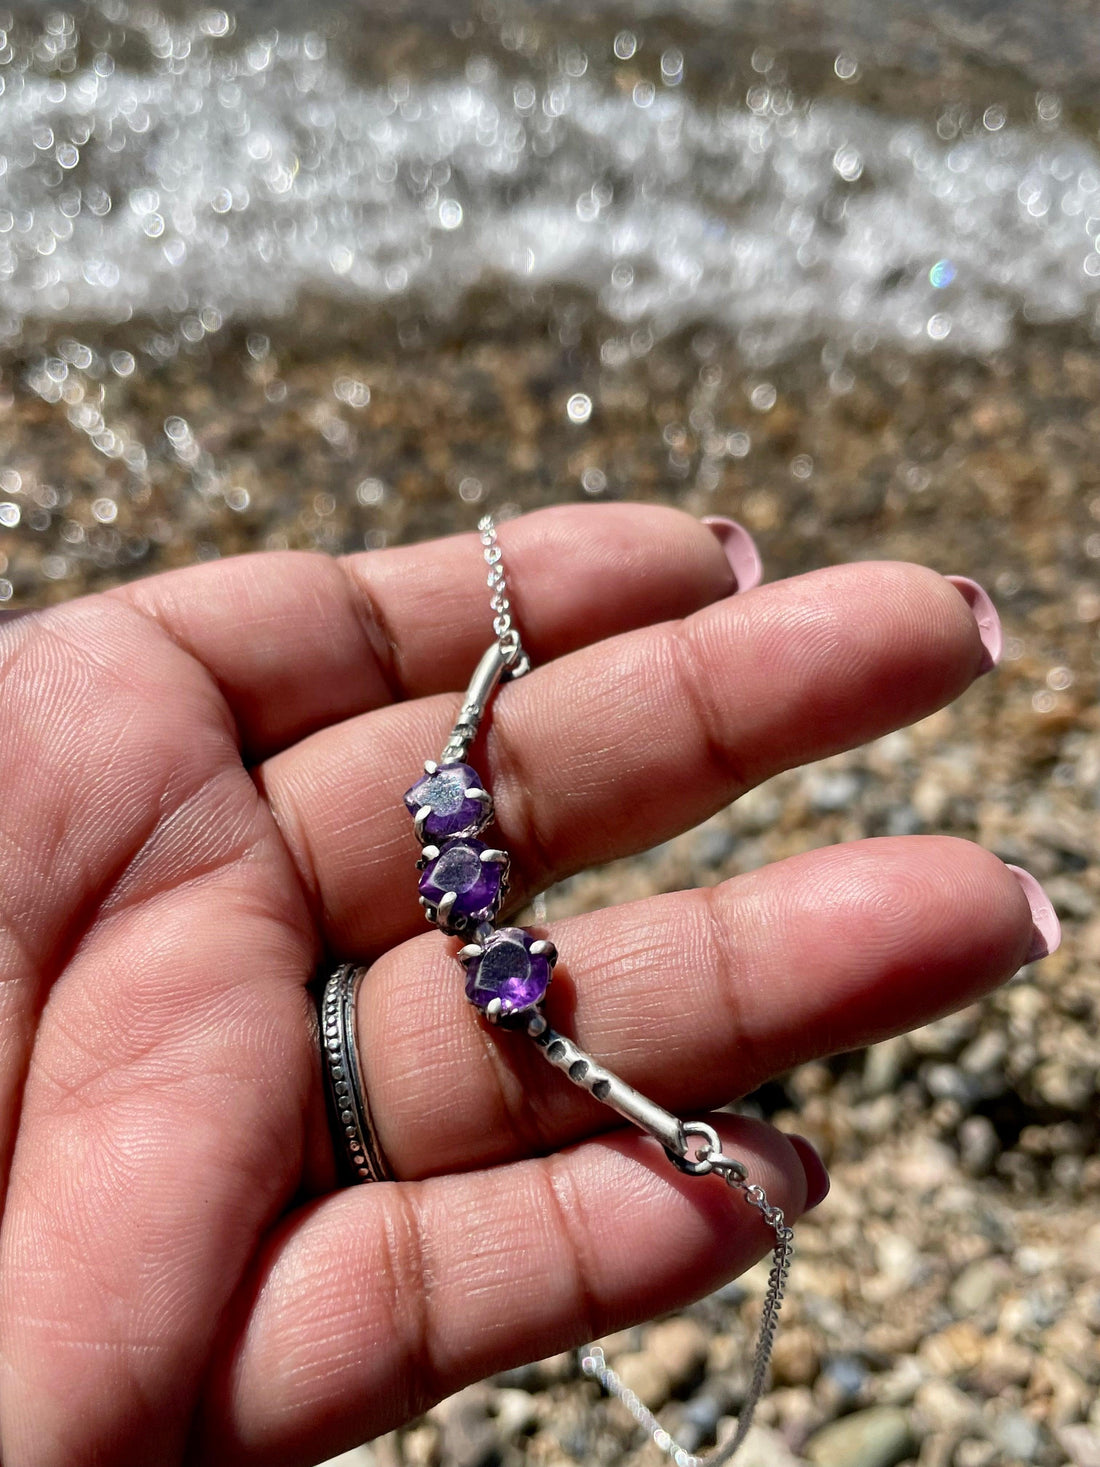 Amethyst Bib Sterling Silver Necklace - Sand and Snow Jewelry - Necklaces - One of a Kind